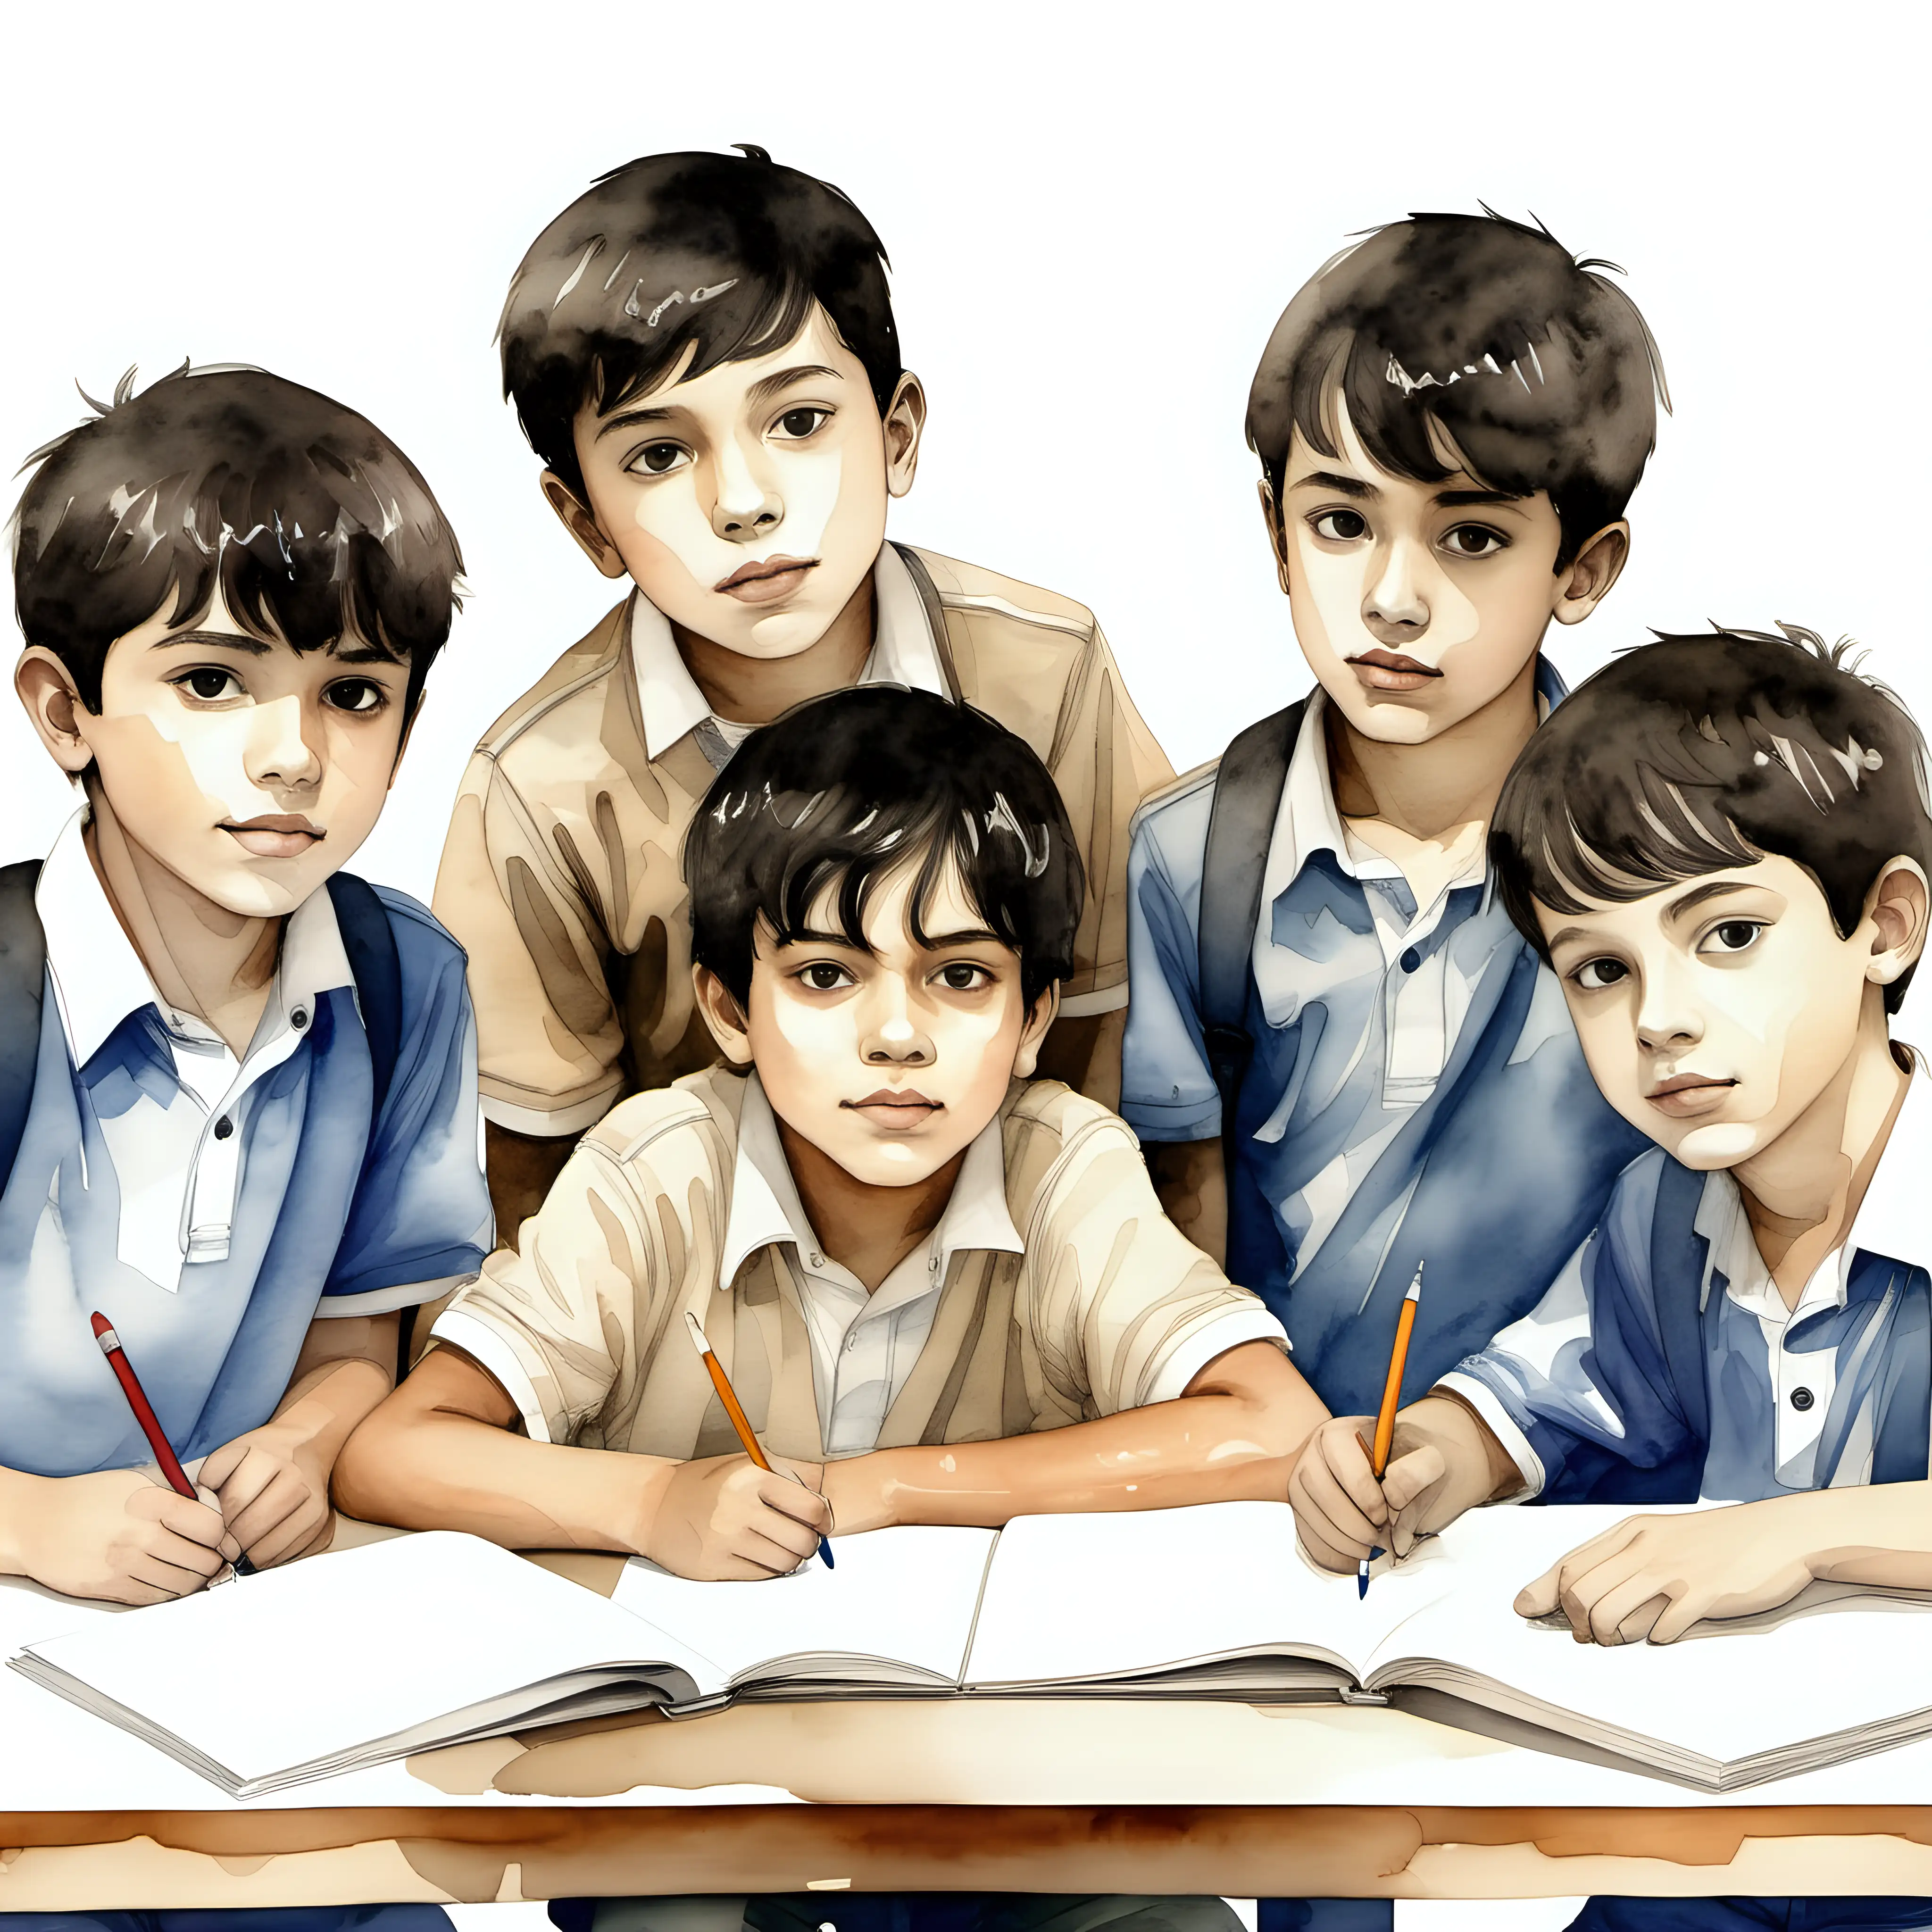 an image of watercolored a dark hair,beige skin, group of boys in a classroom,  against white background,beautiful art